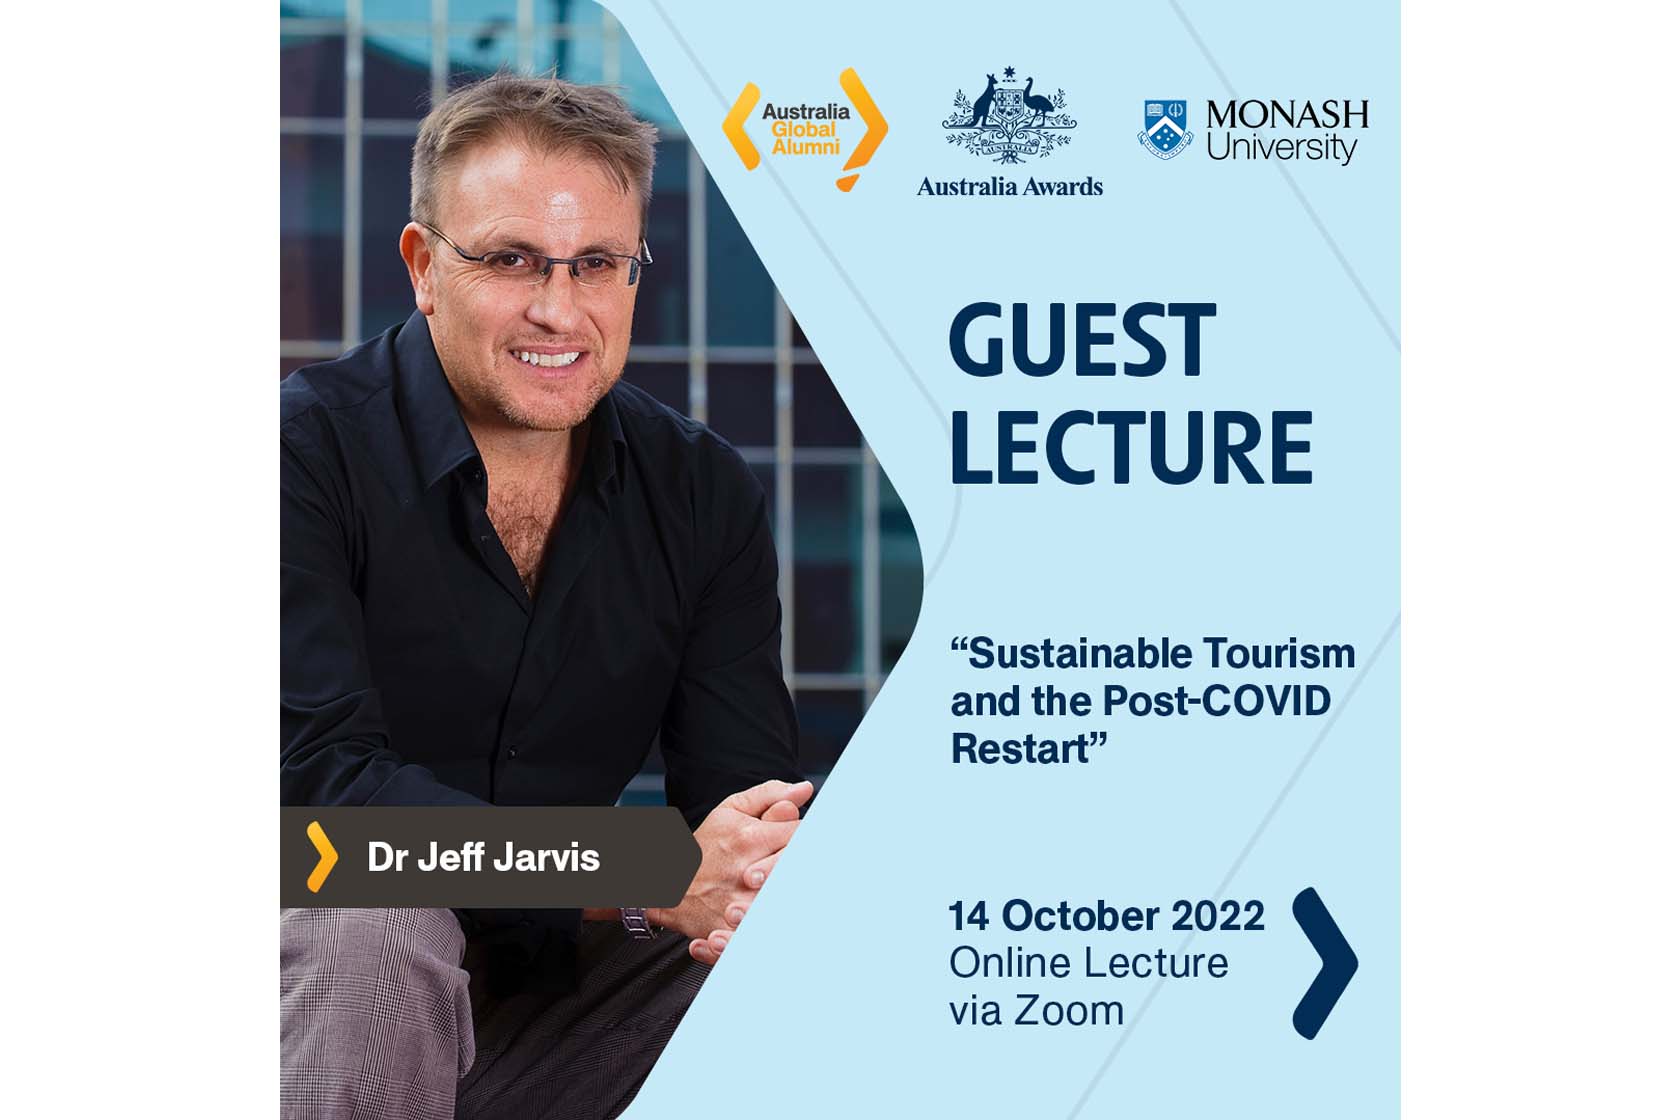 A poster featuring Dr Jeff Jarvis informs about the upcoming Guest Lecture titled Sustainable Tourism and the Post-COVID Restart.